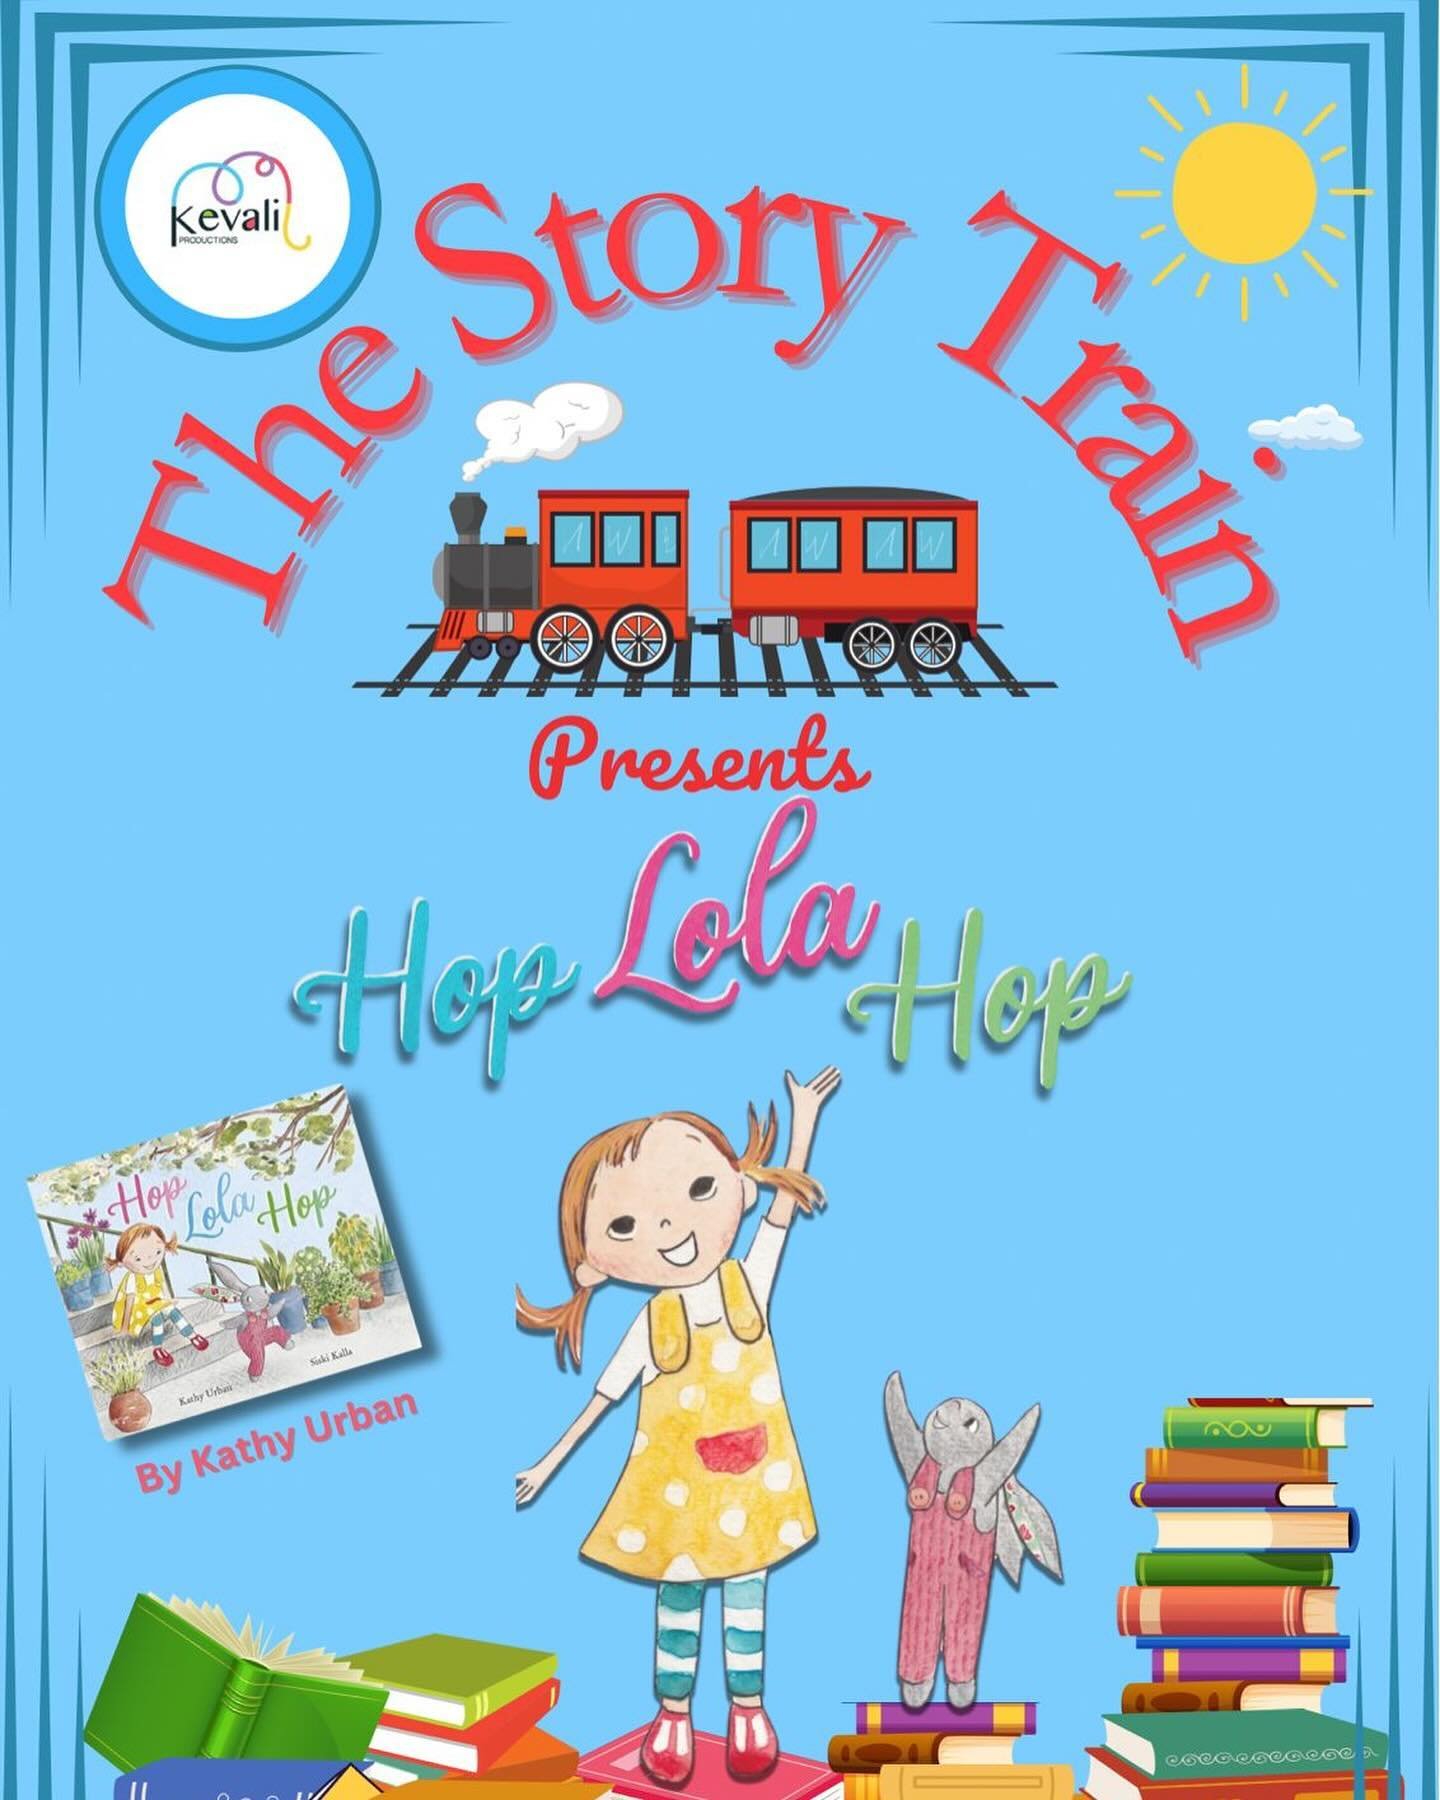 🚂🐰 We&rsquo;re hop hop hopping with excitement 🐰🚂

I&rsquo;ve teamed up with the wonderful creative team of @kevaliproductions who&rsquo;ve been working hard behind the scenes to bring Lola&rsquo;s story to live !!

🚂🐰Coming next term:

Hop Abo